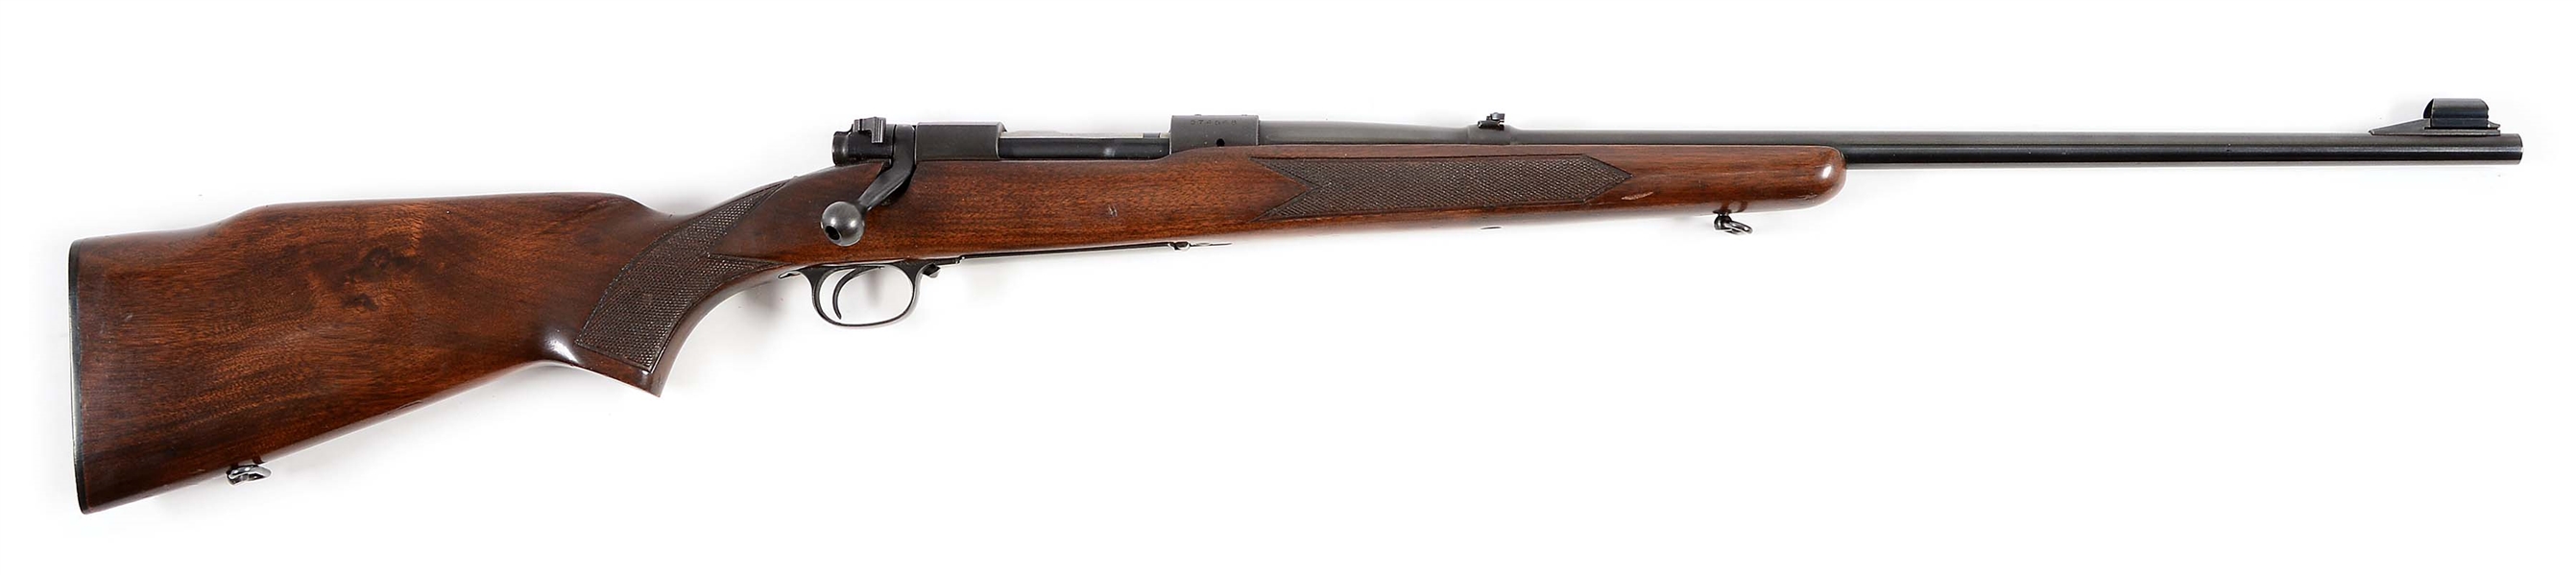 (C) WINCHESTER PRE-64 MODEL 70 FEATHERWEIGHT BOLT ACTION RIFLE (1963).